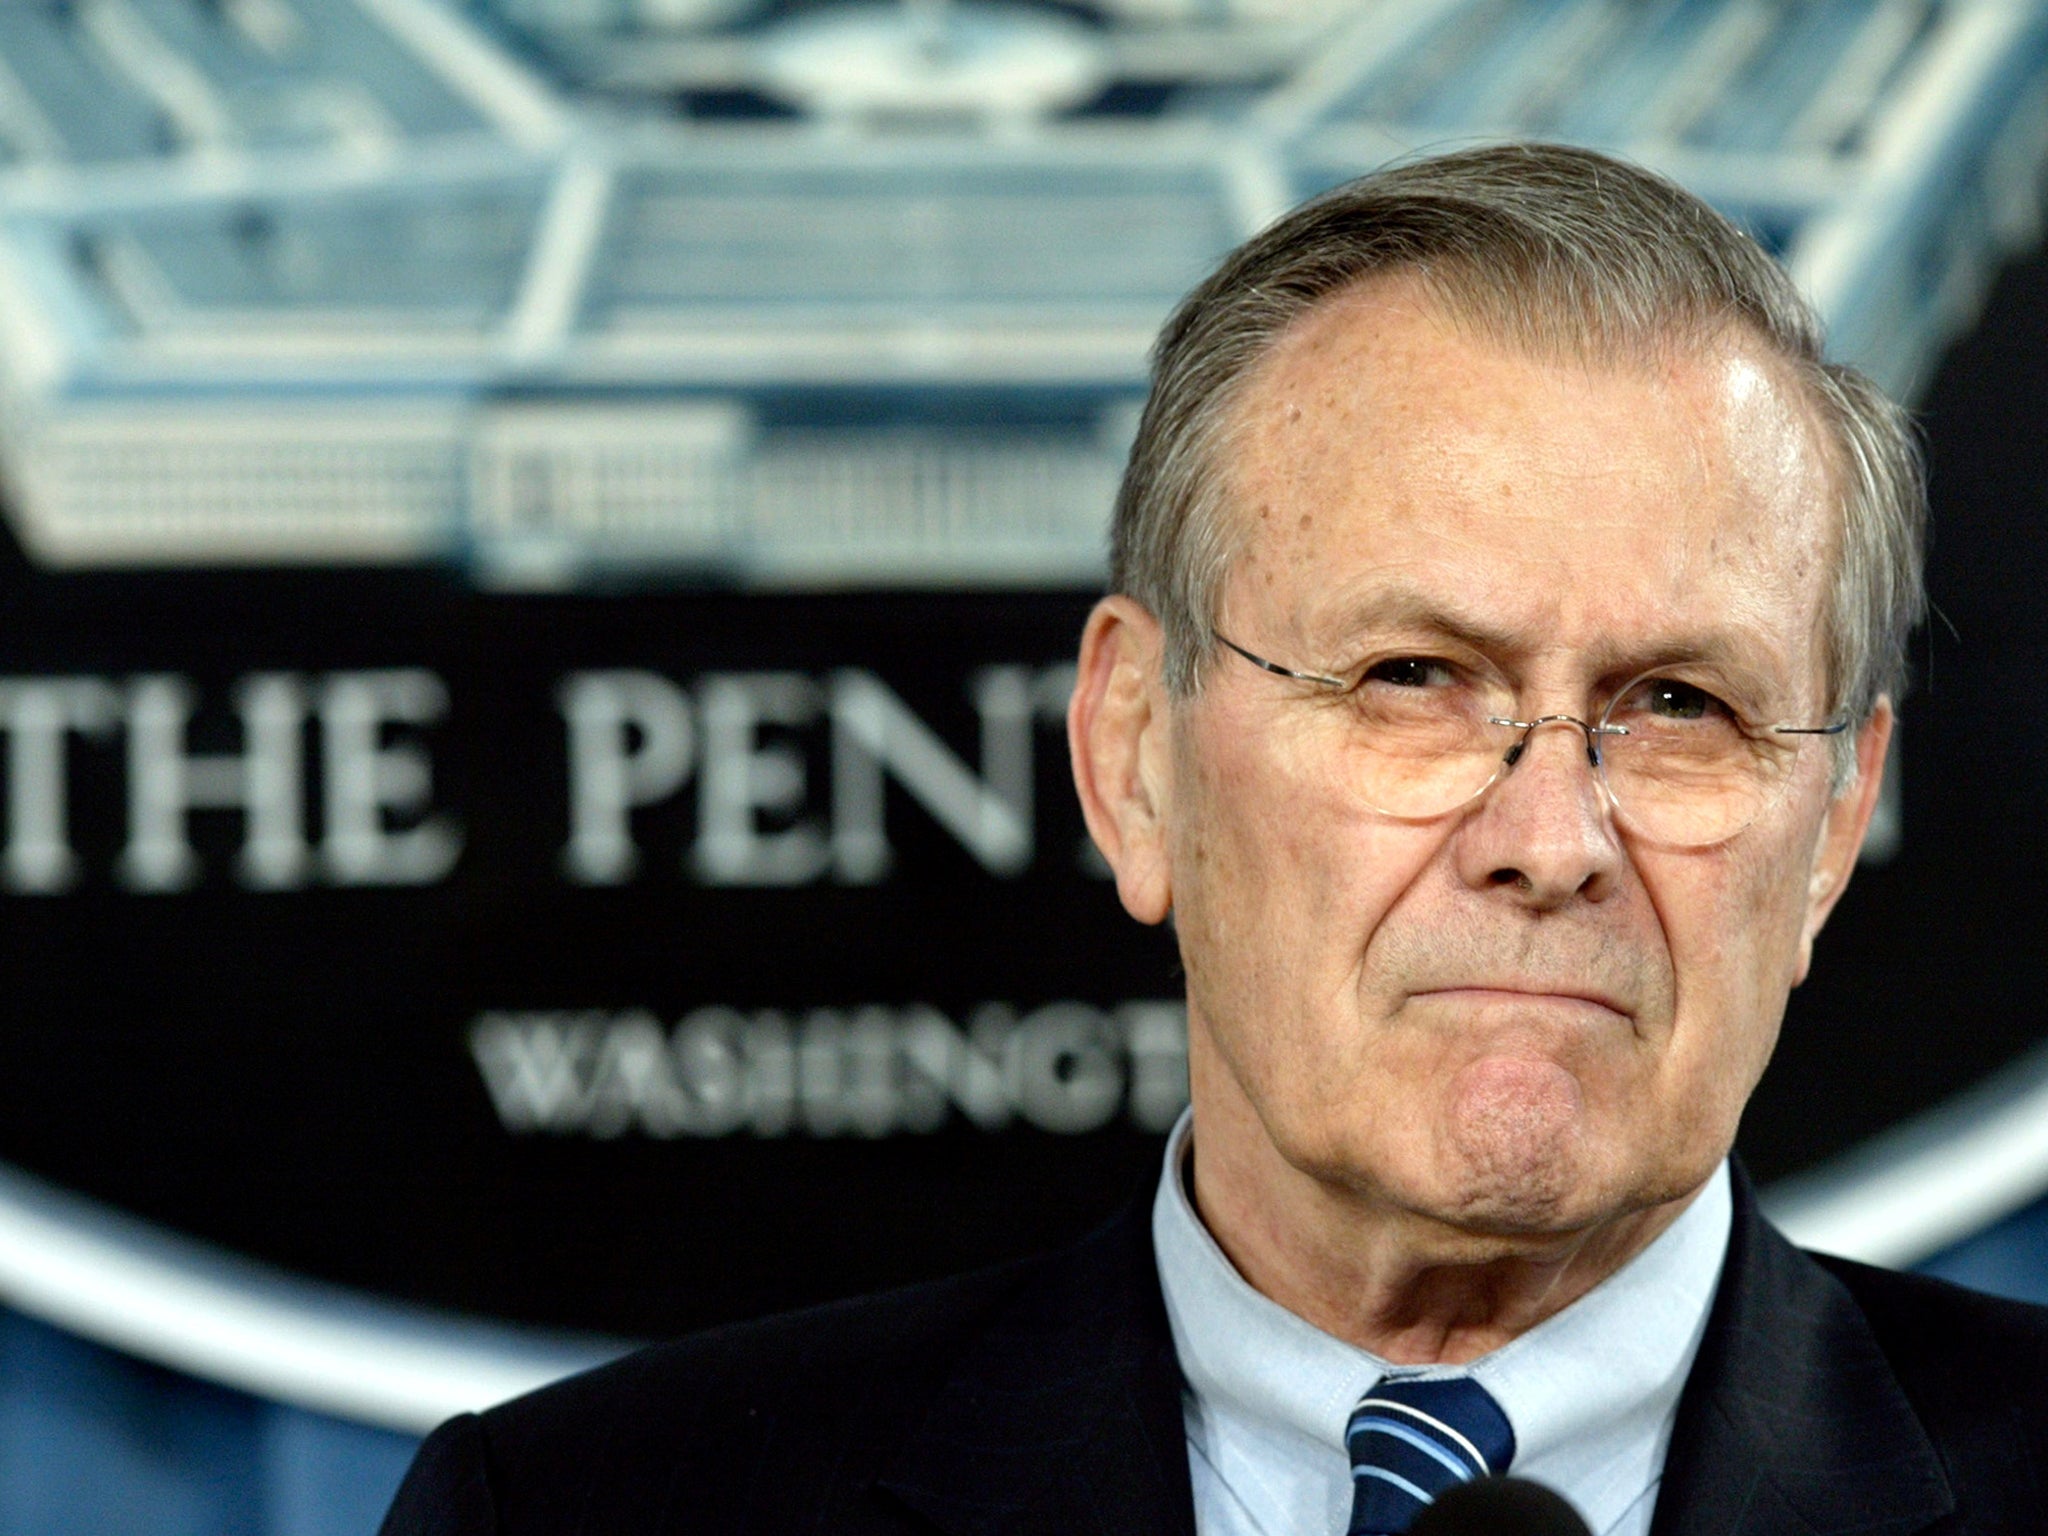 Rumsfeld’s forced exit under clouds of blame and disapproval cast a shadow over his previously illustrious career